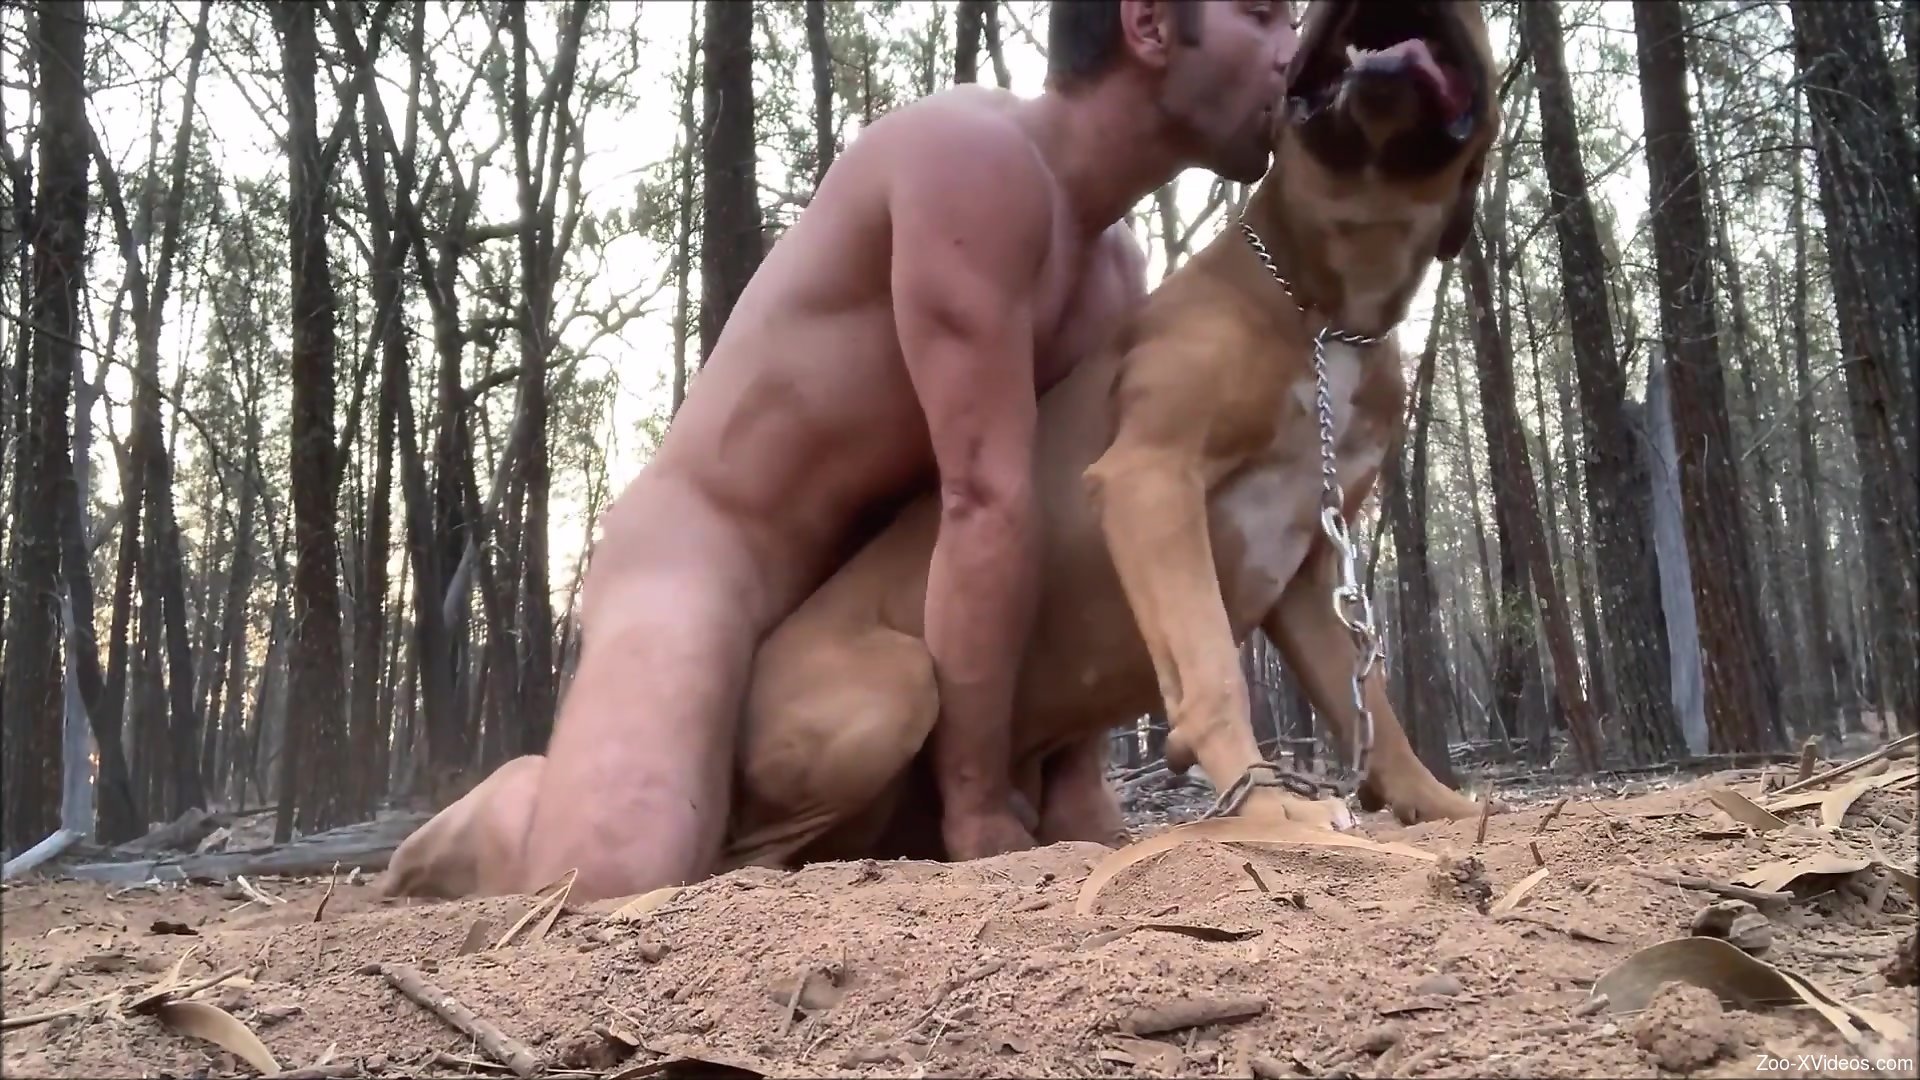 Animal And Man Fuckking - Shredded guy fucking a sexy brown animal in the woods